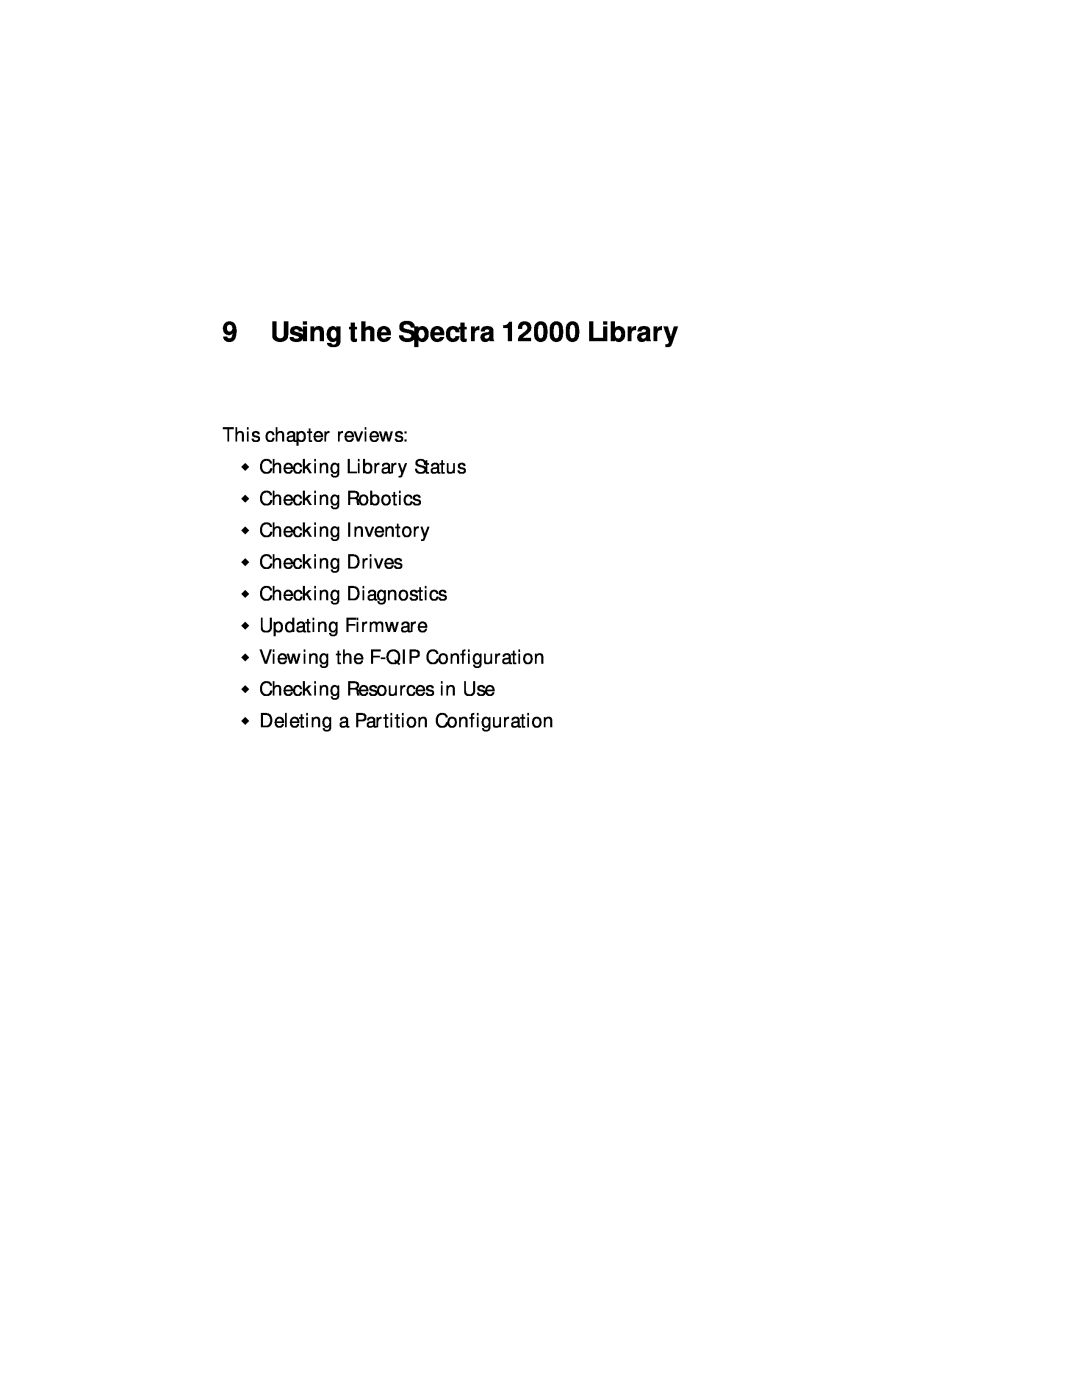 Spectra Logic manual Using the Spectra 12000 Library, This chapter reviews Checking Library Status Checking Robotics 